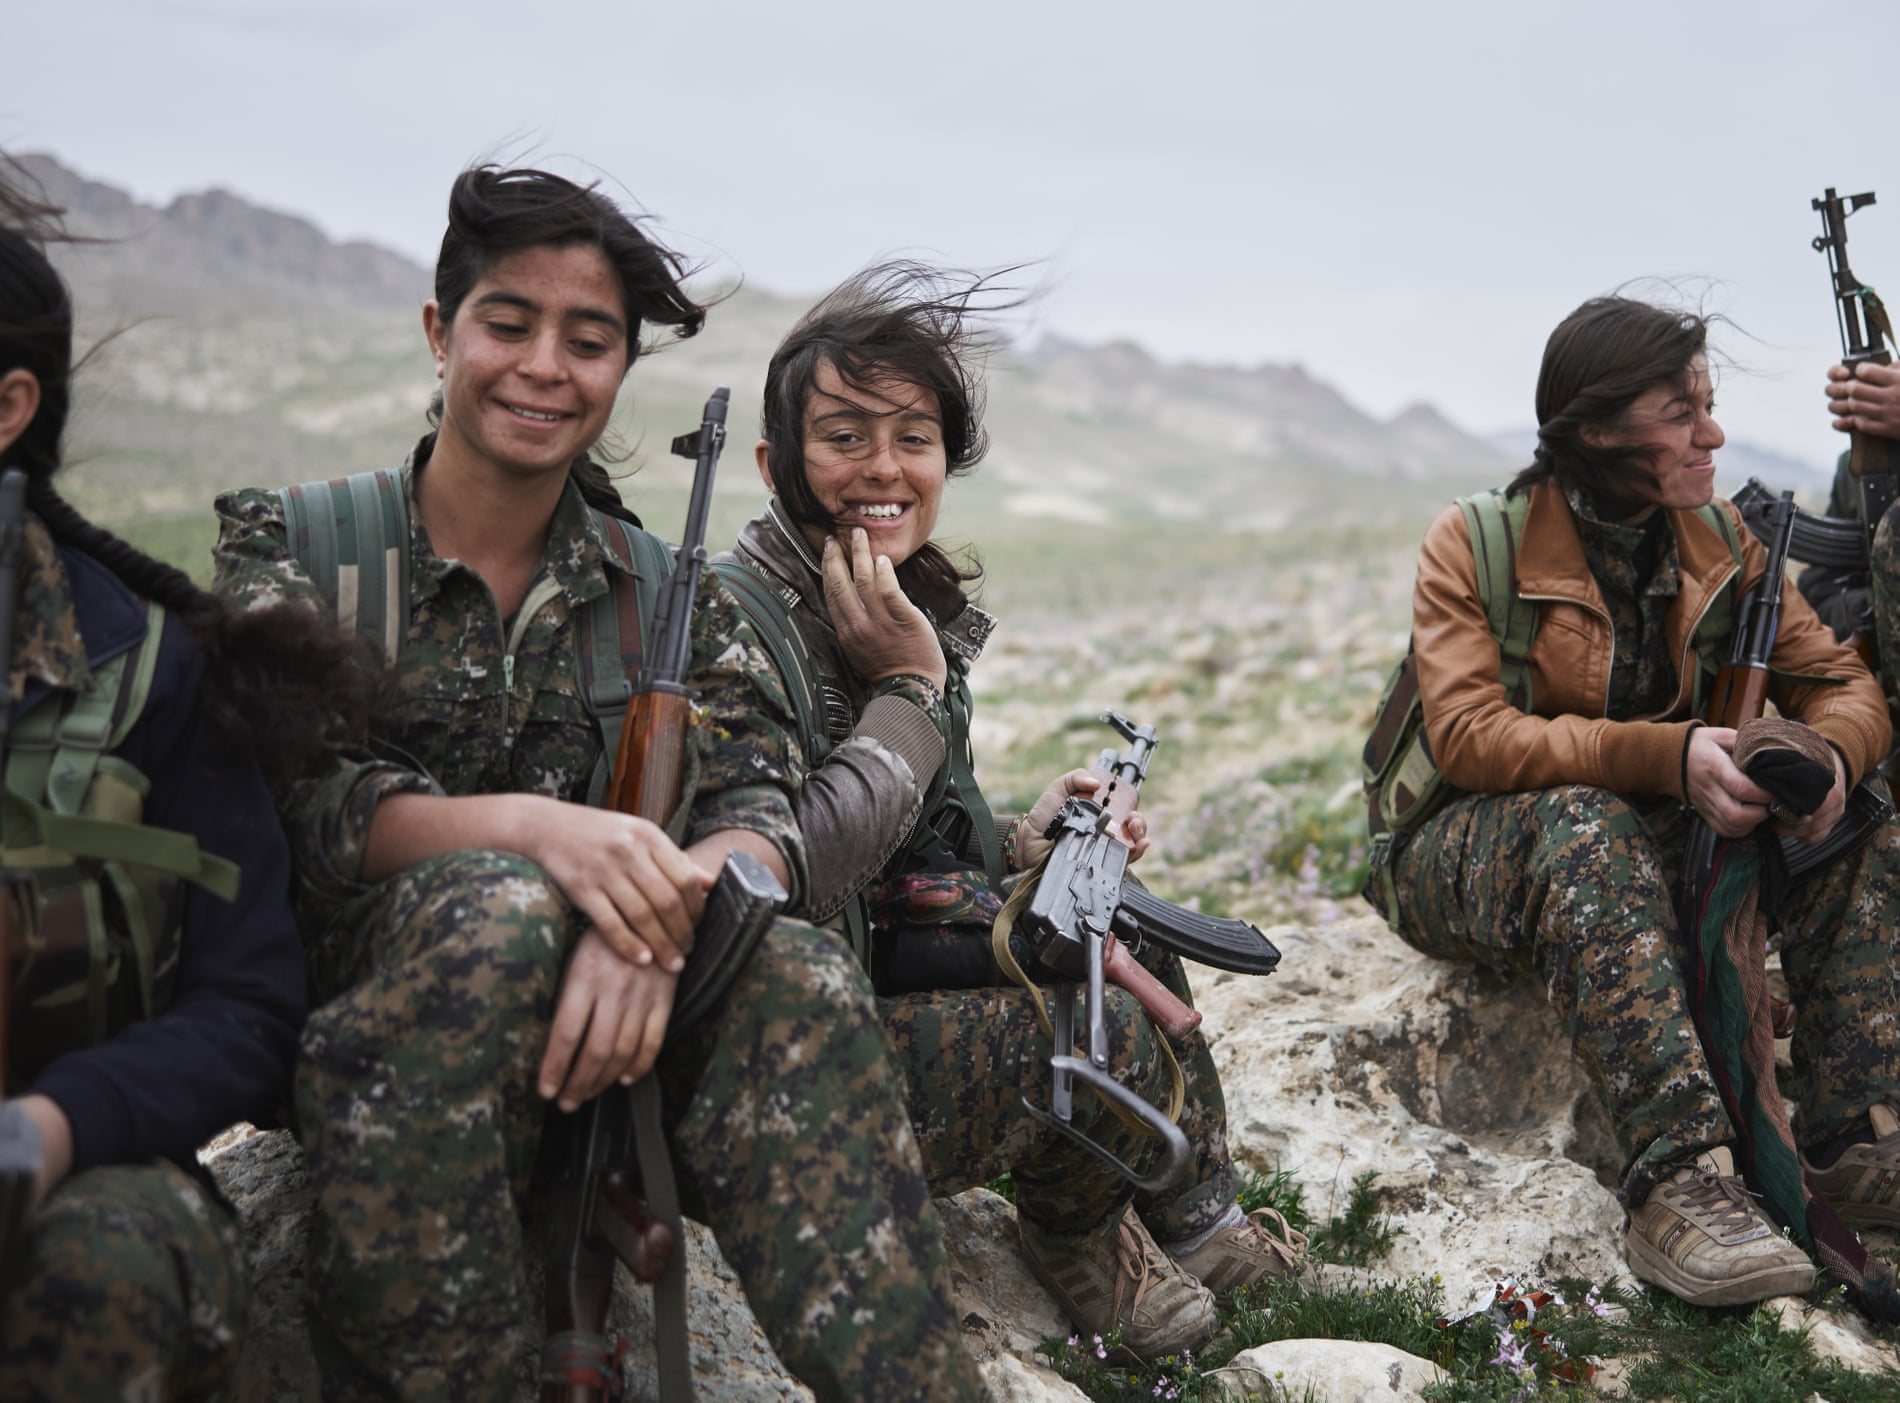 Faces of war: Kurdistan’s armed struggle against Islamic State